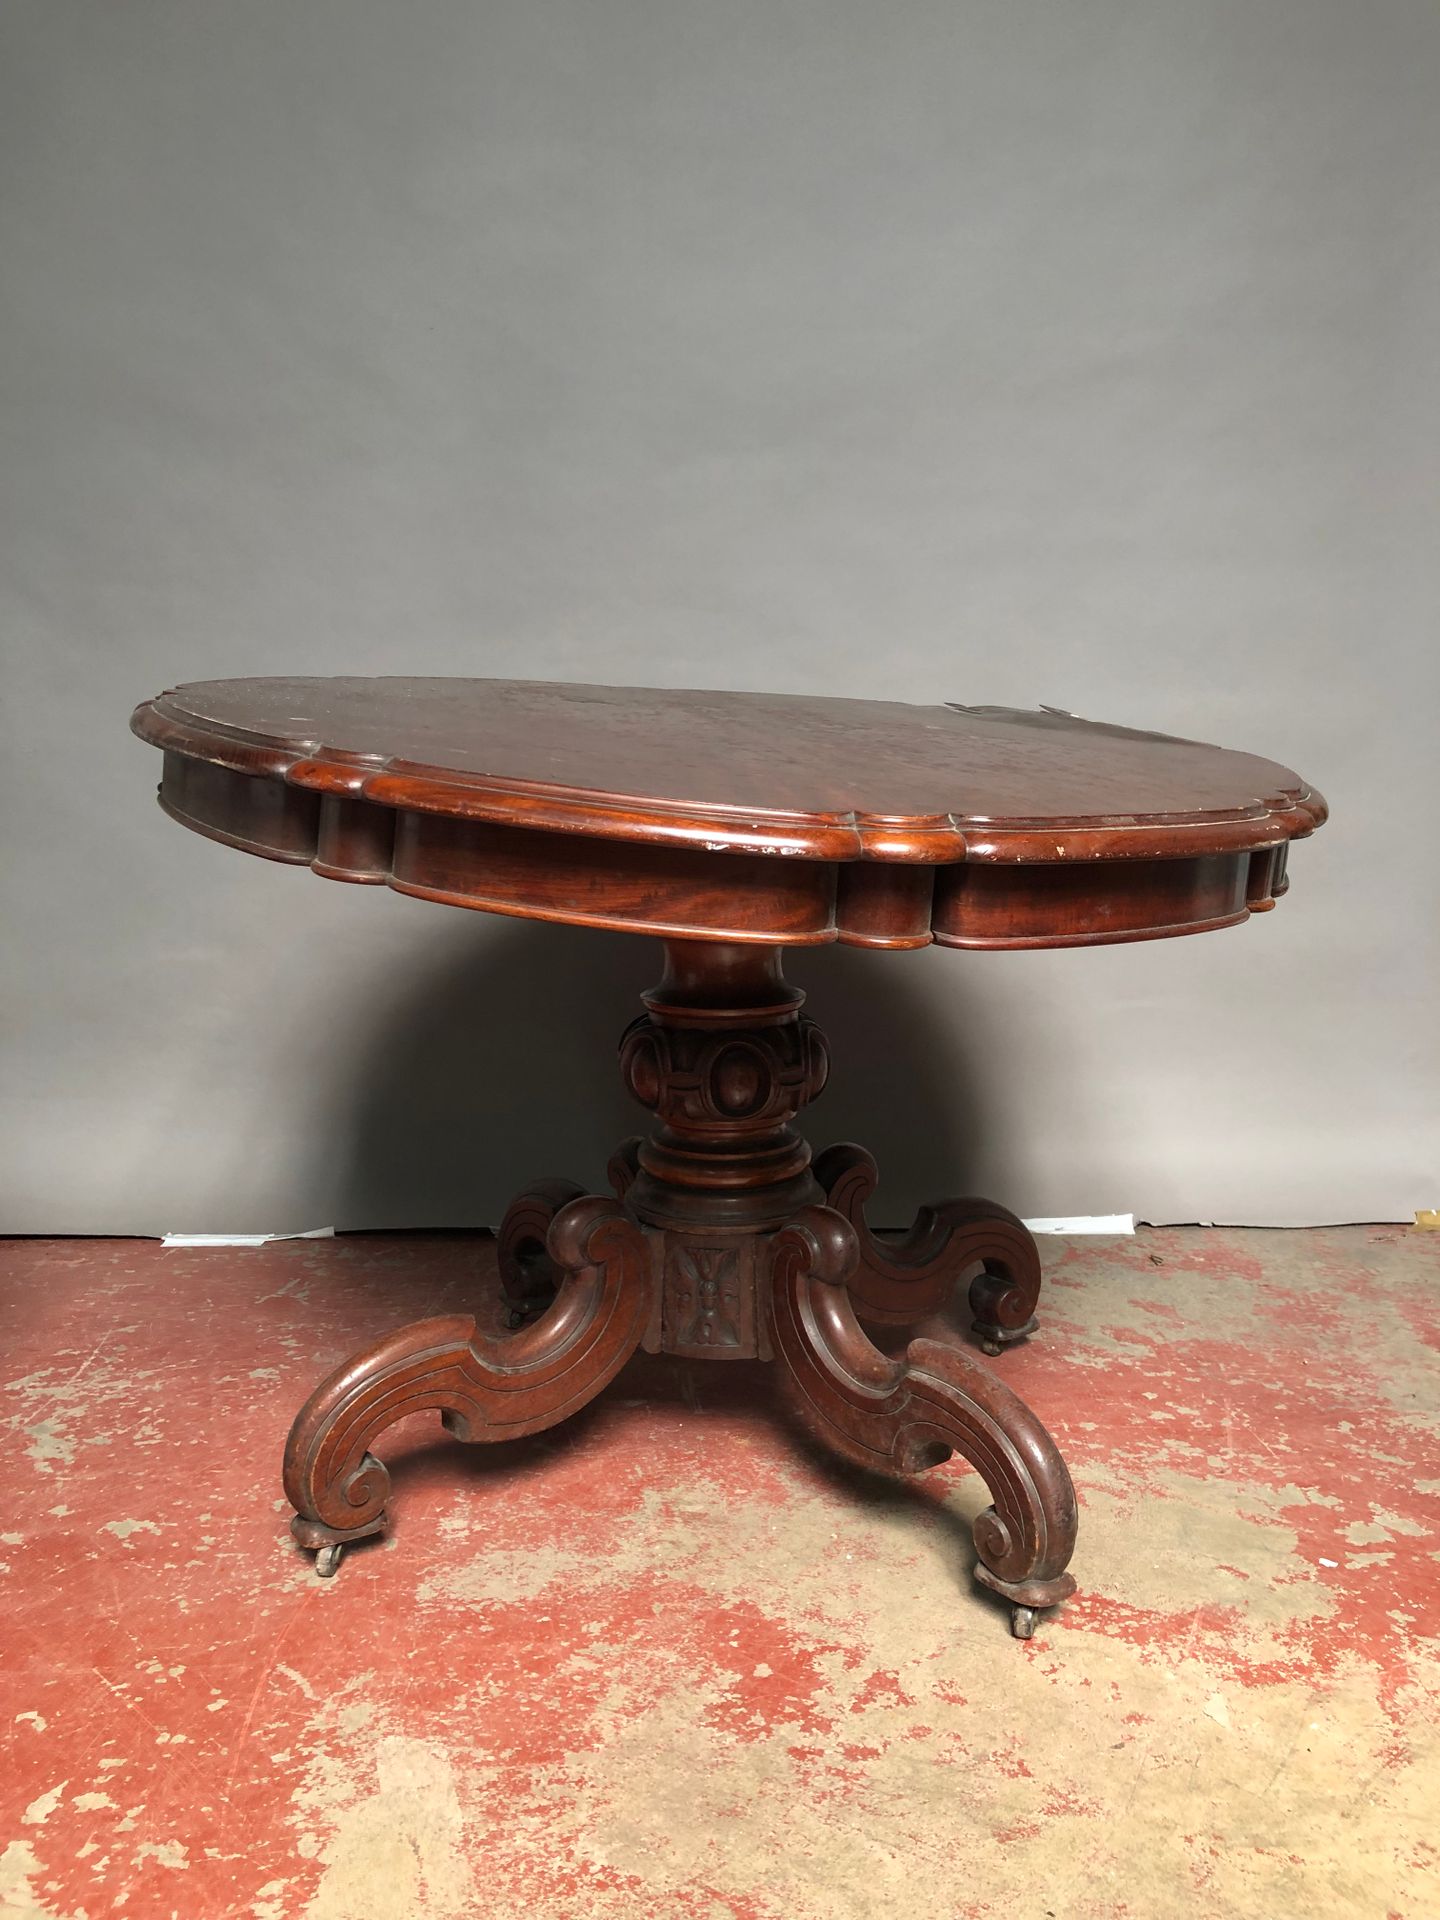 Null Mahogany and mahogany veneer pedestal table opening by two drawers in the b&hellip;